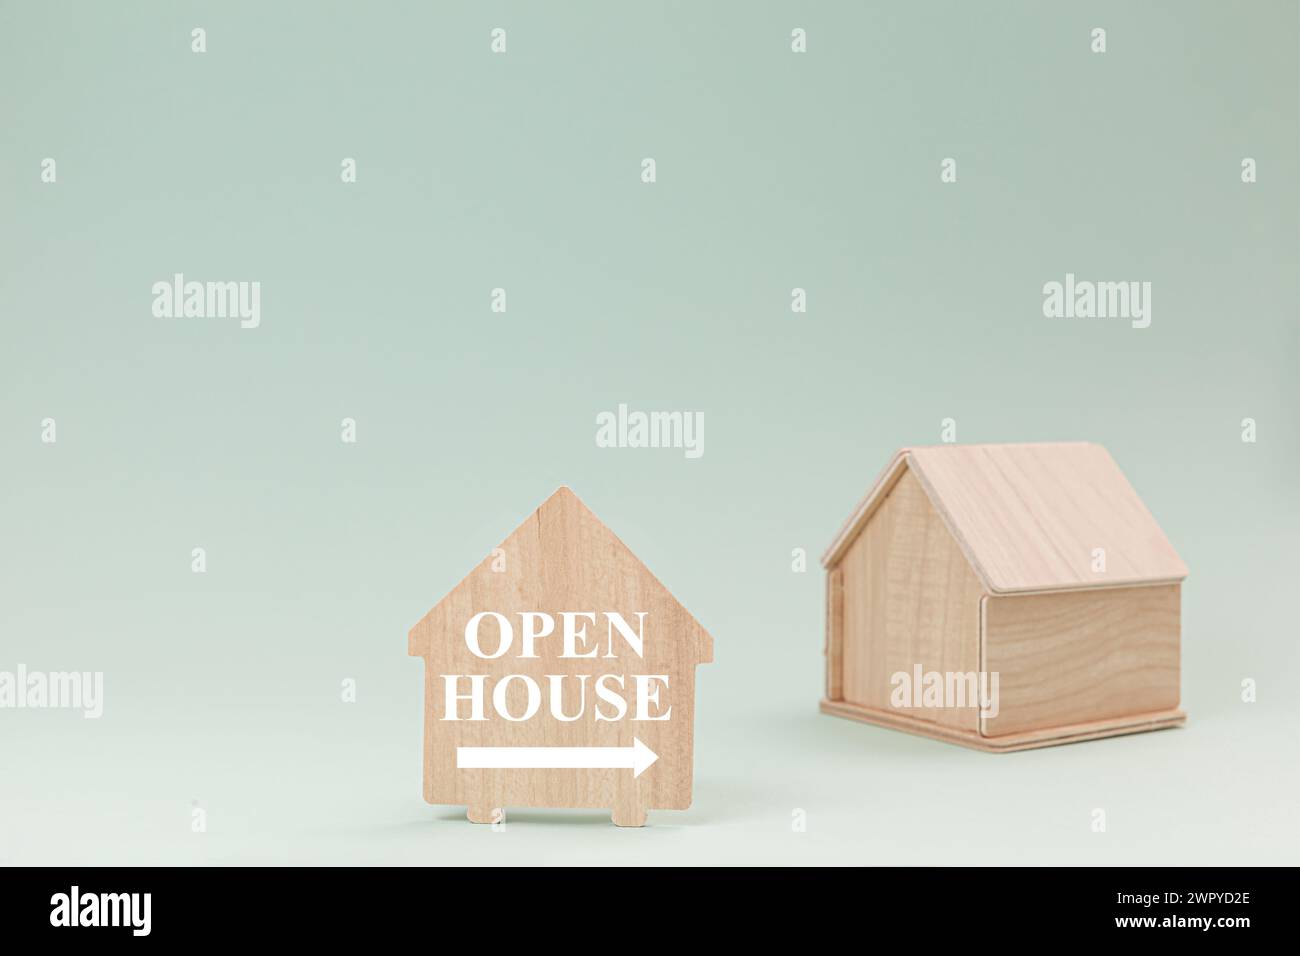 Simplistic wooden house model isolated on pale green background, with text Open House on signboard. Stock Photo